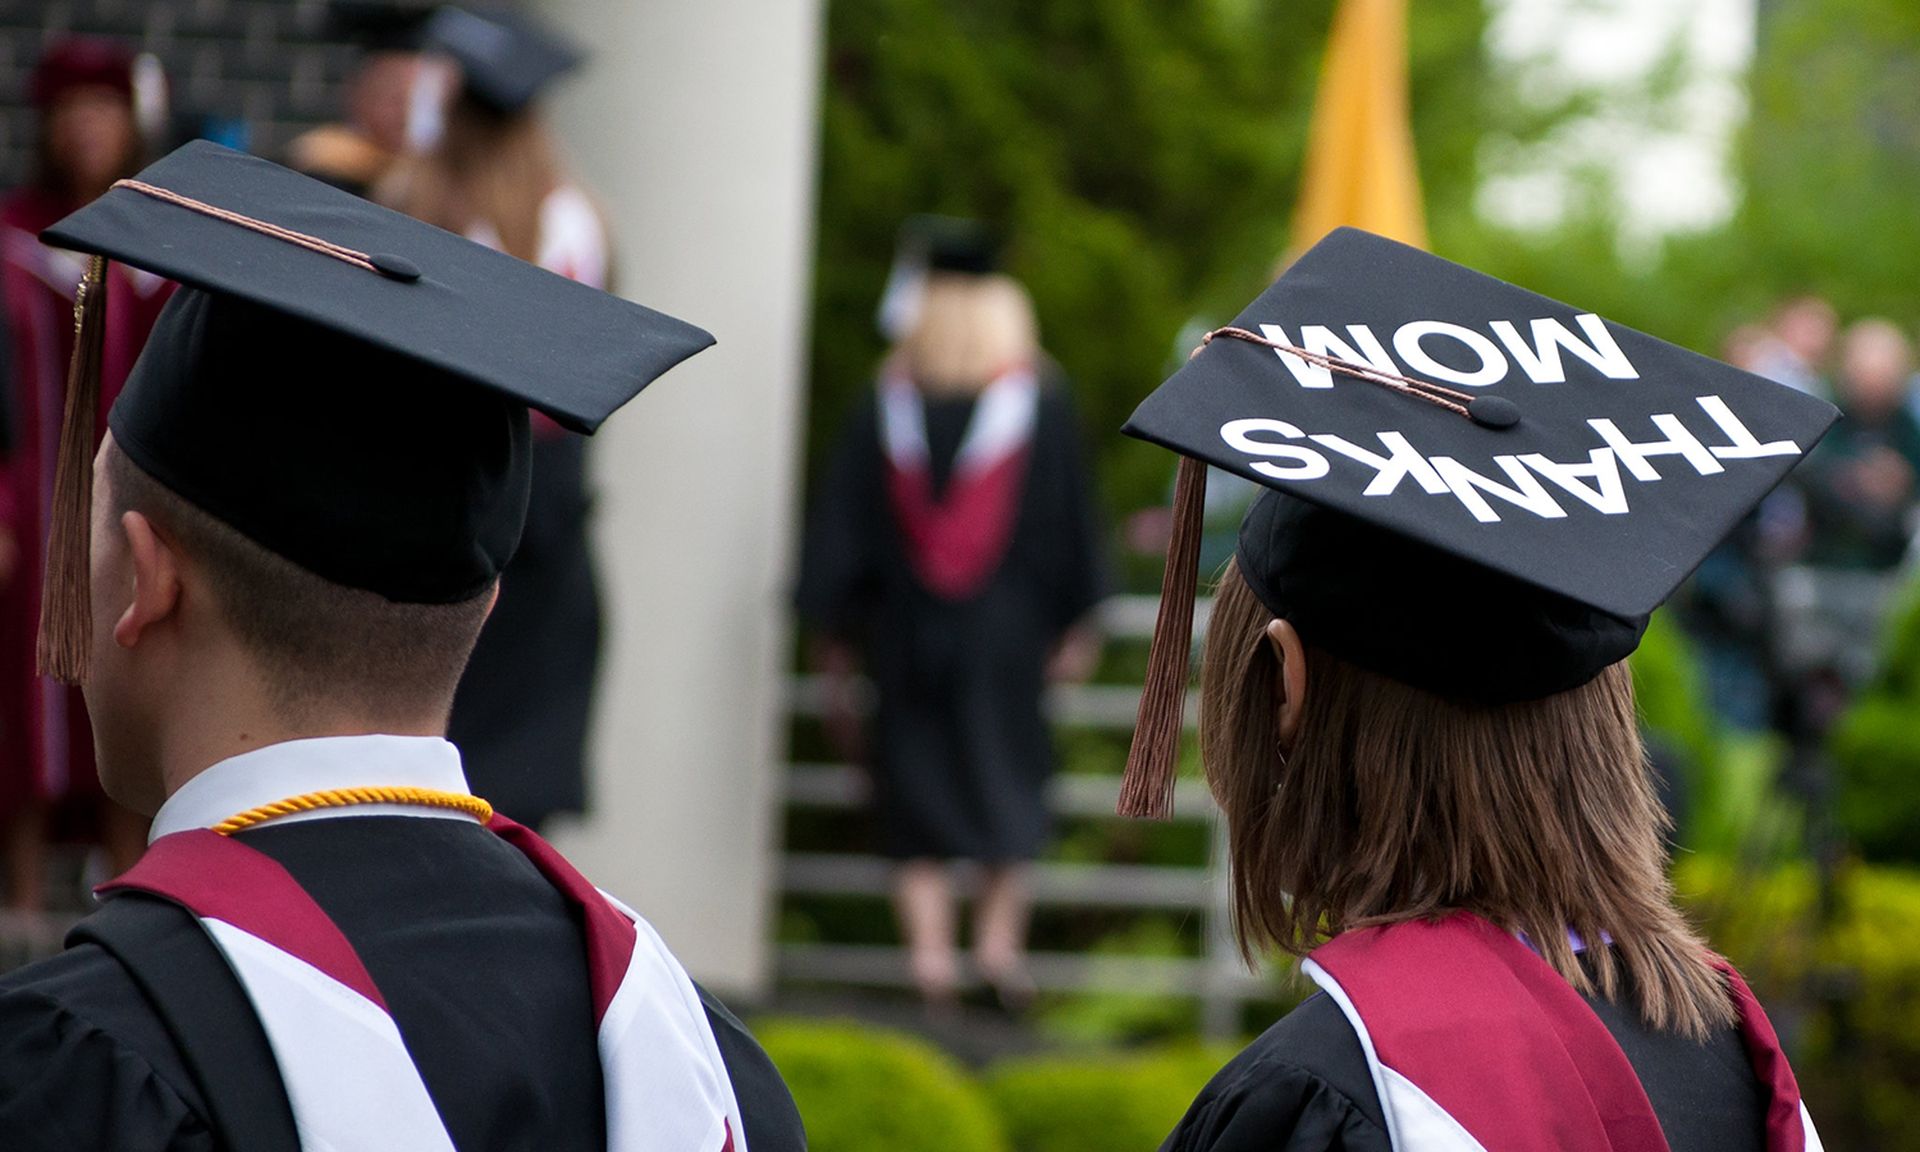 Most employment fraud schemes target higher education, Proofpoint researchers reported Tuesday. Pictured: A college graduation ceremony is seen in Ramapo, N.J., in this cropped image. (&#8220;College Graduation&#8221; by ajagendorf25 is marked with CC BY-NC 2.0.)